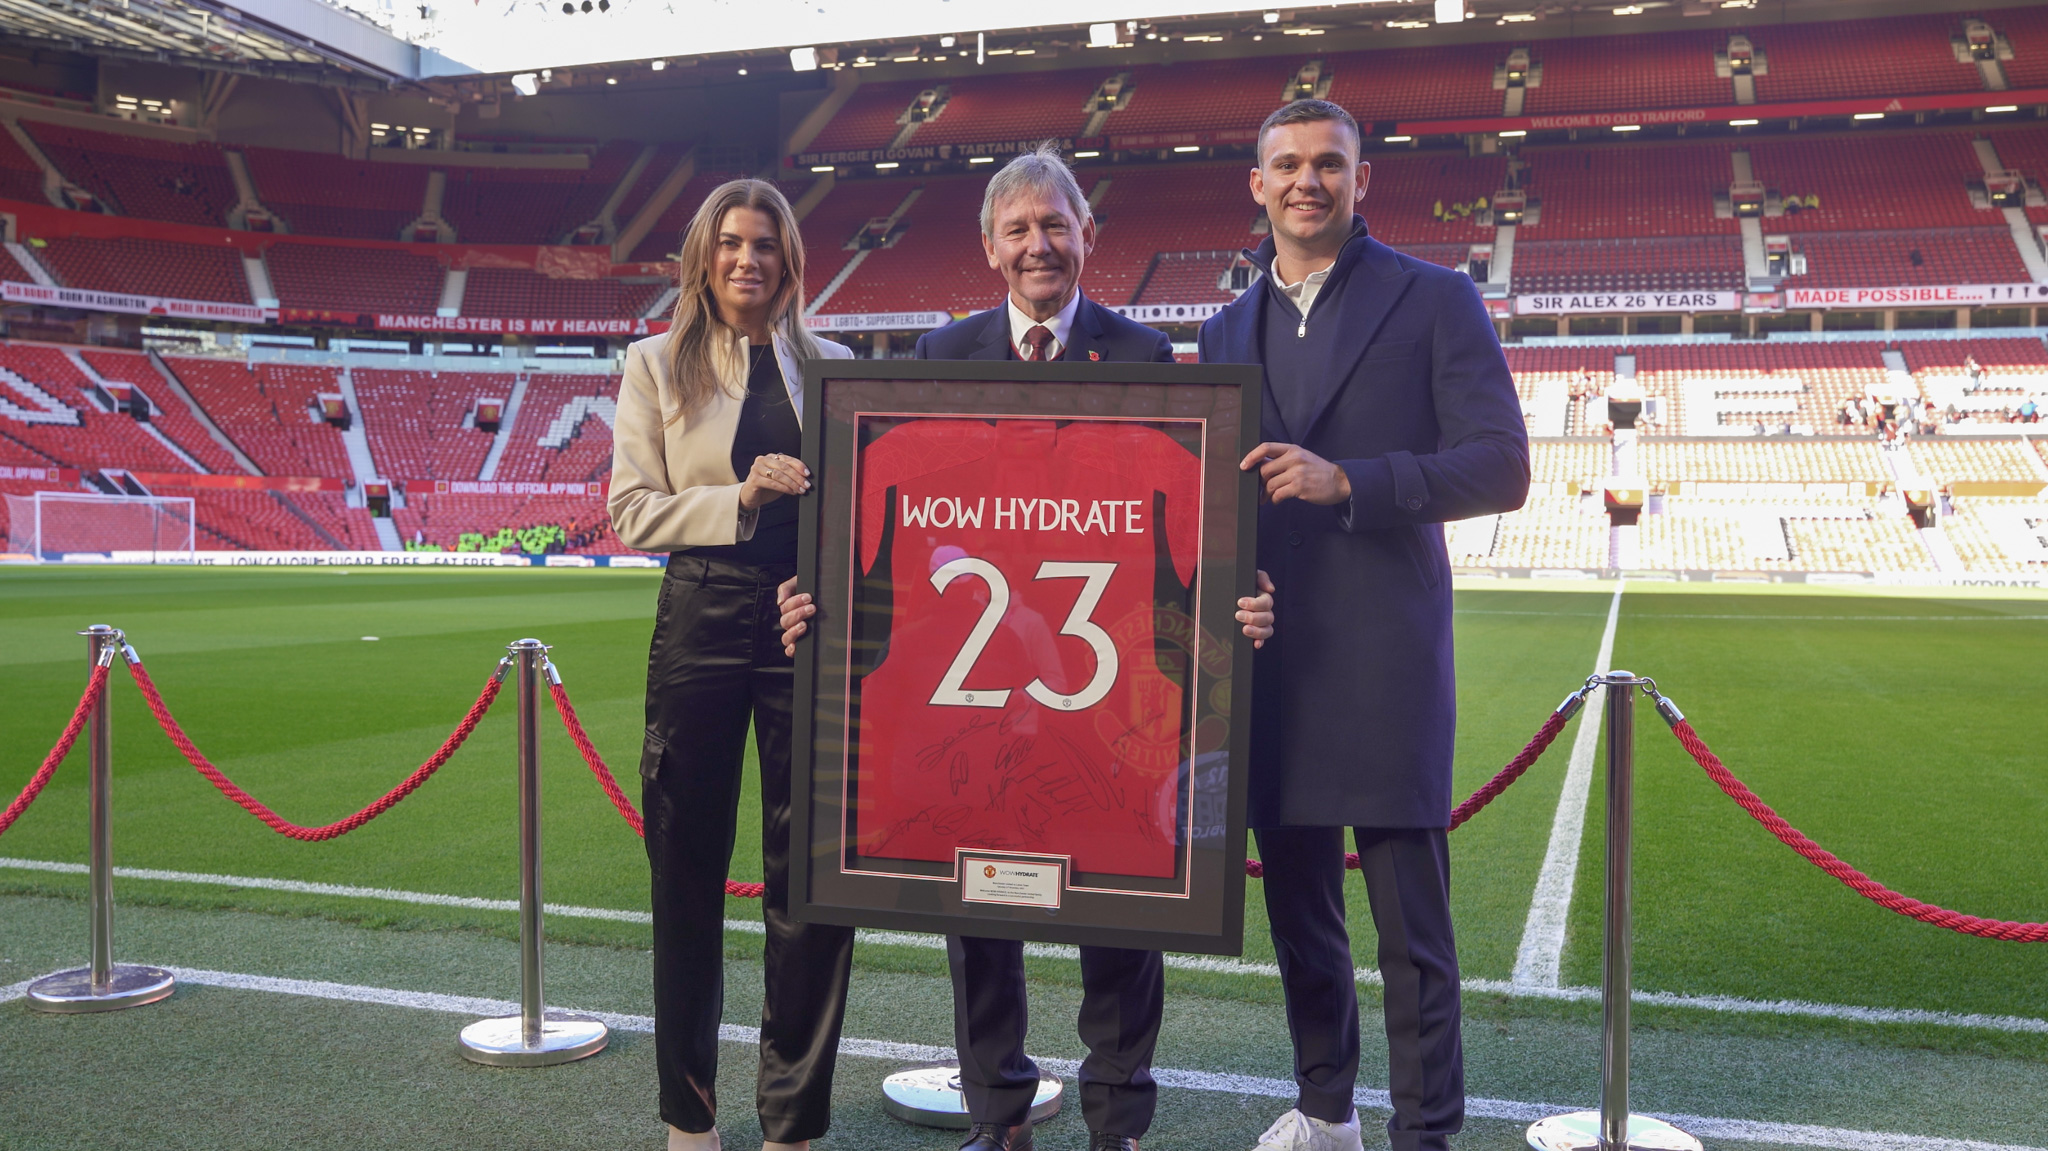 Jake Brocklesby and Queenie Porter with Bryan Robson